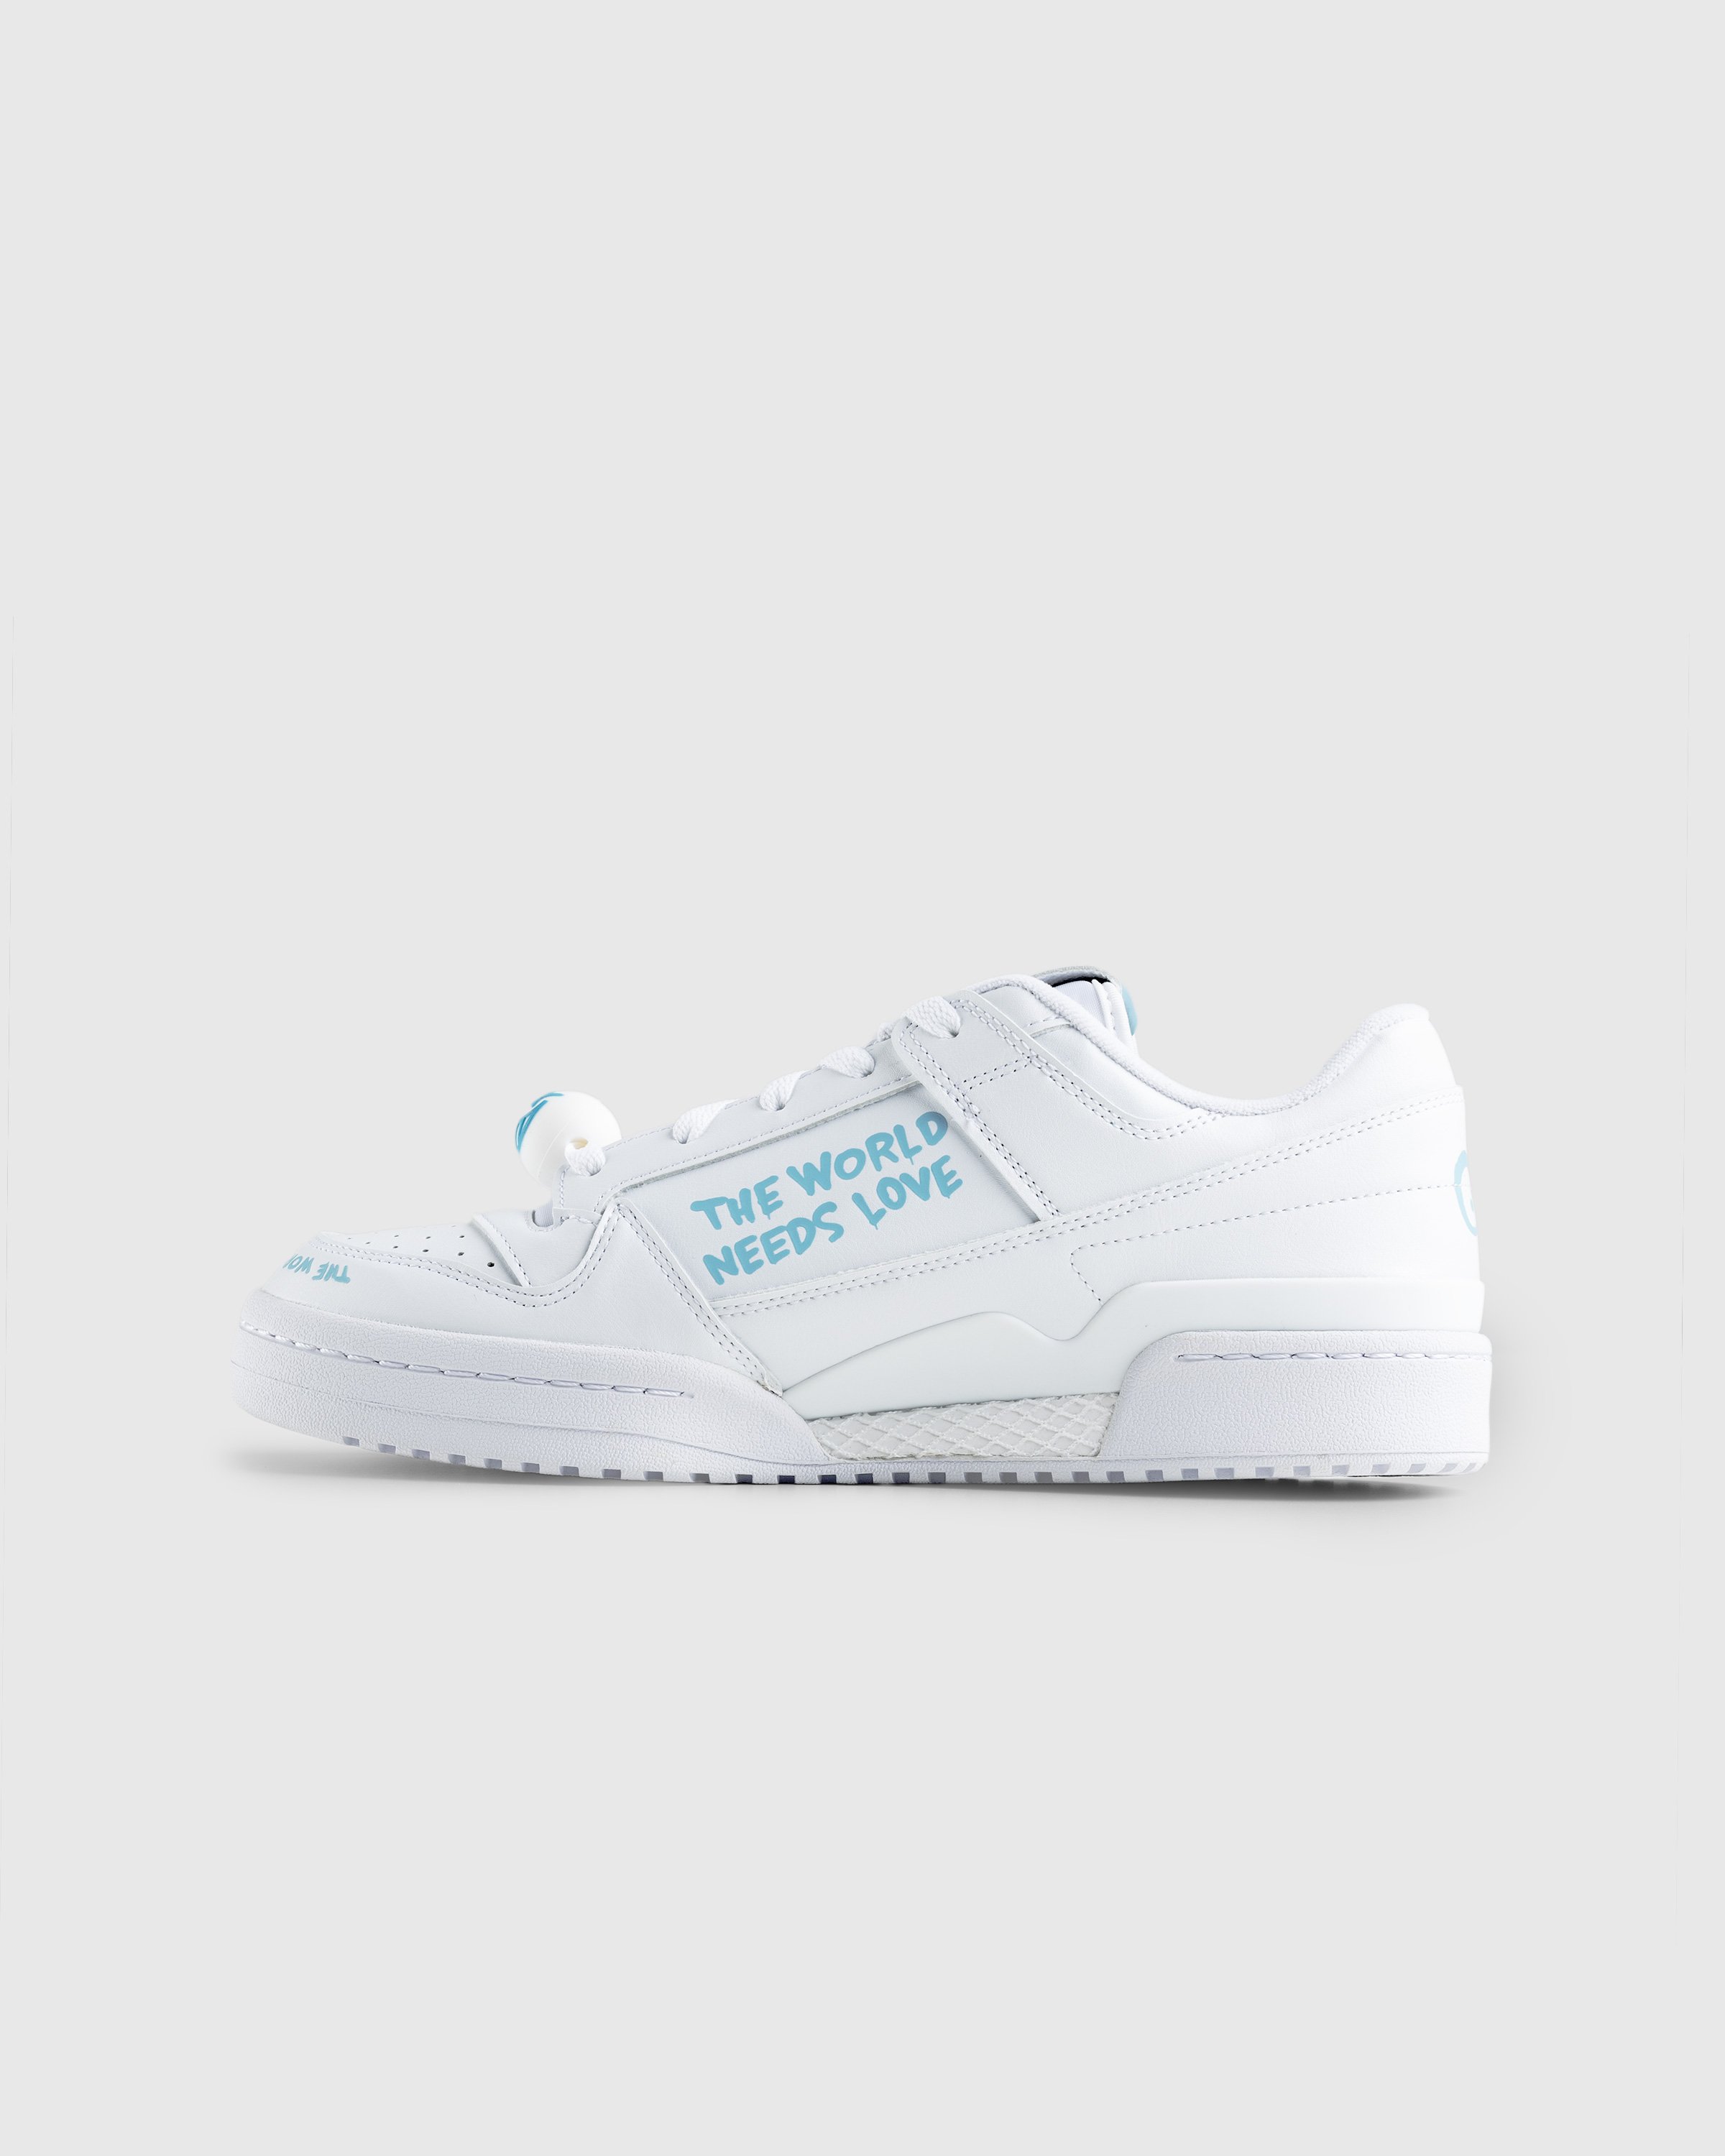 Adidas - André Saraiva Forum Low CL White/Blue - Footwear - White - Image 2